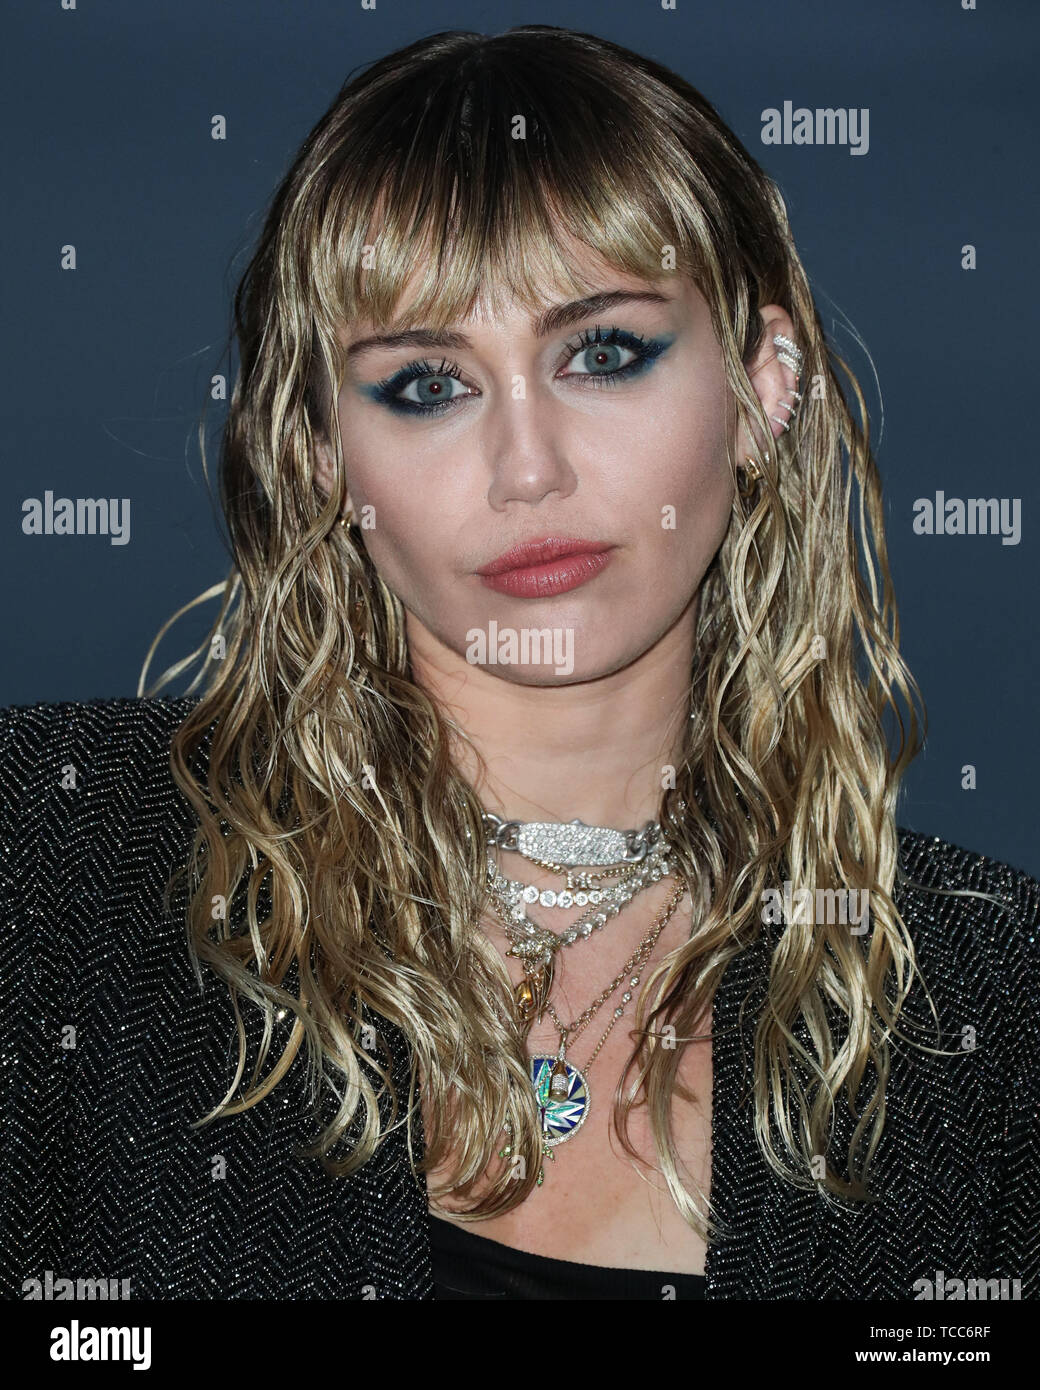 MALIBU, LOS ANGELES, CALIFORNIA, USA - JUNE 06: Singer Miley Cyrus arrives at the Saint Laurent Mens Spring Summer 20 Show held at Paradise Cove Beach on June 6, 2019 in Malibu, Los Angeles, California, United States. (Photo by Xavier Collin/Image Press Agency) Stock Photo